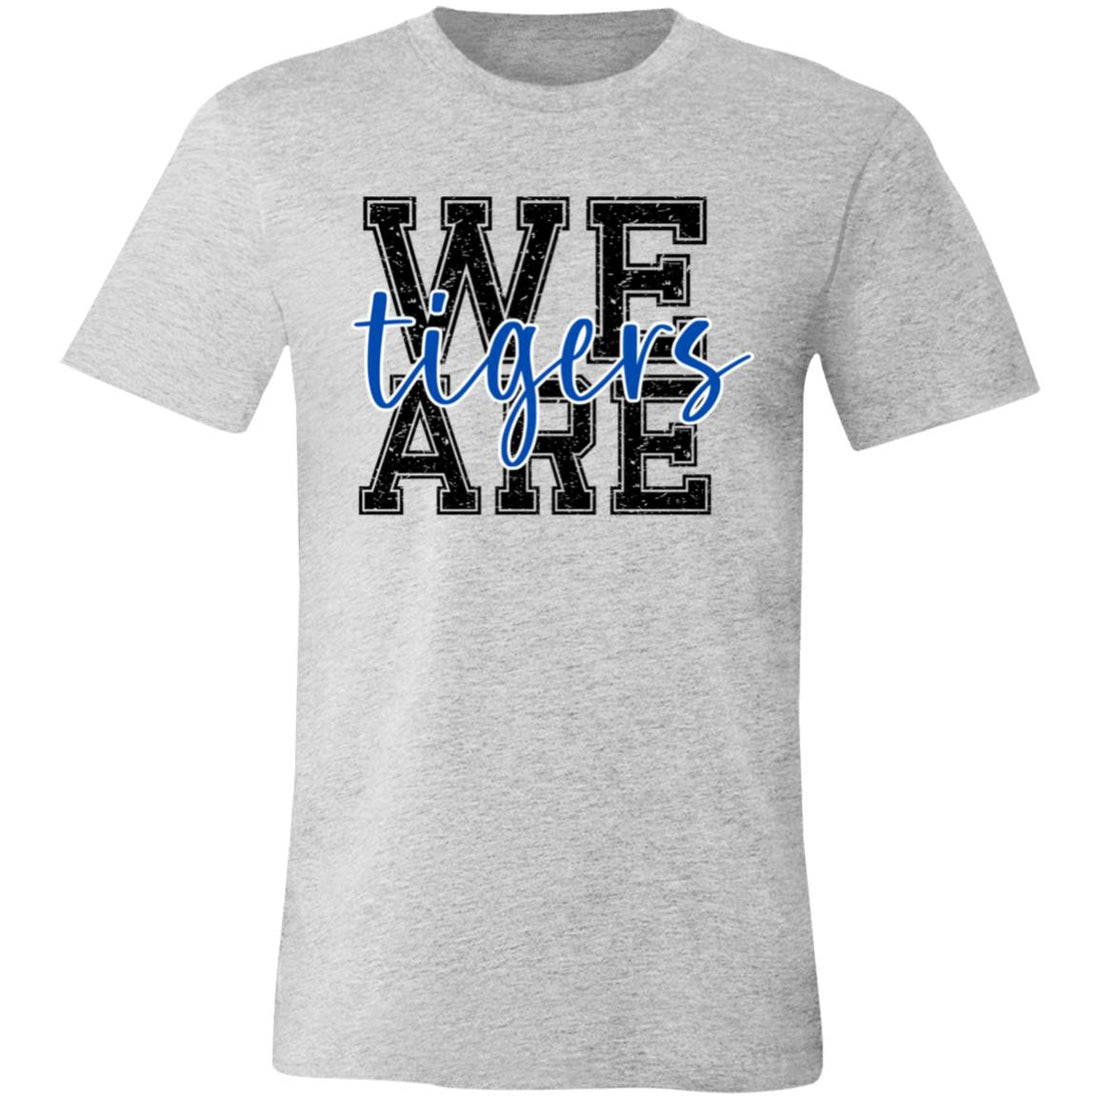 We Are Tigers Unisex Jersey Short-Sleeve T-Shirt - T-Shirts - Positively Sassy - We Are Tigers Unisex Jersey Short-Sleeve T-Shirt